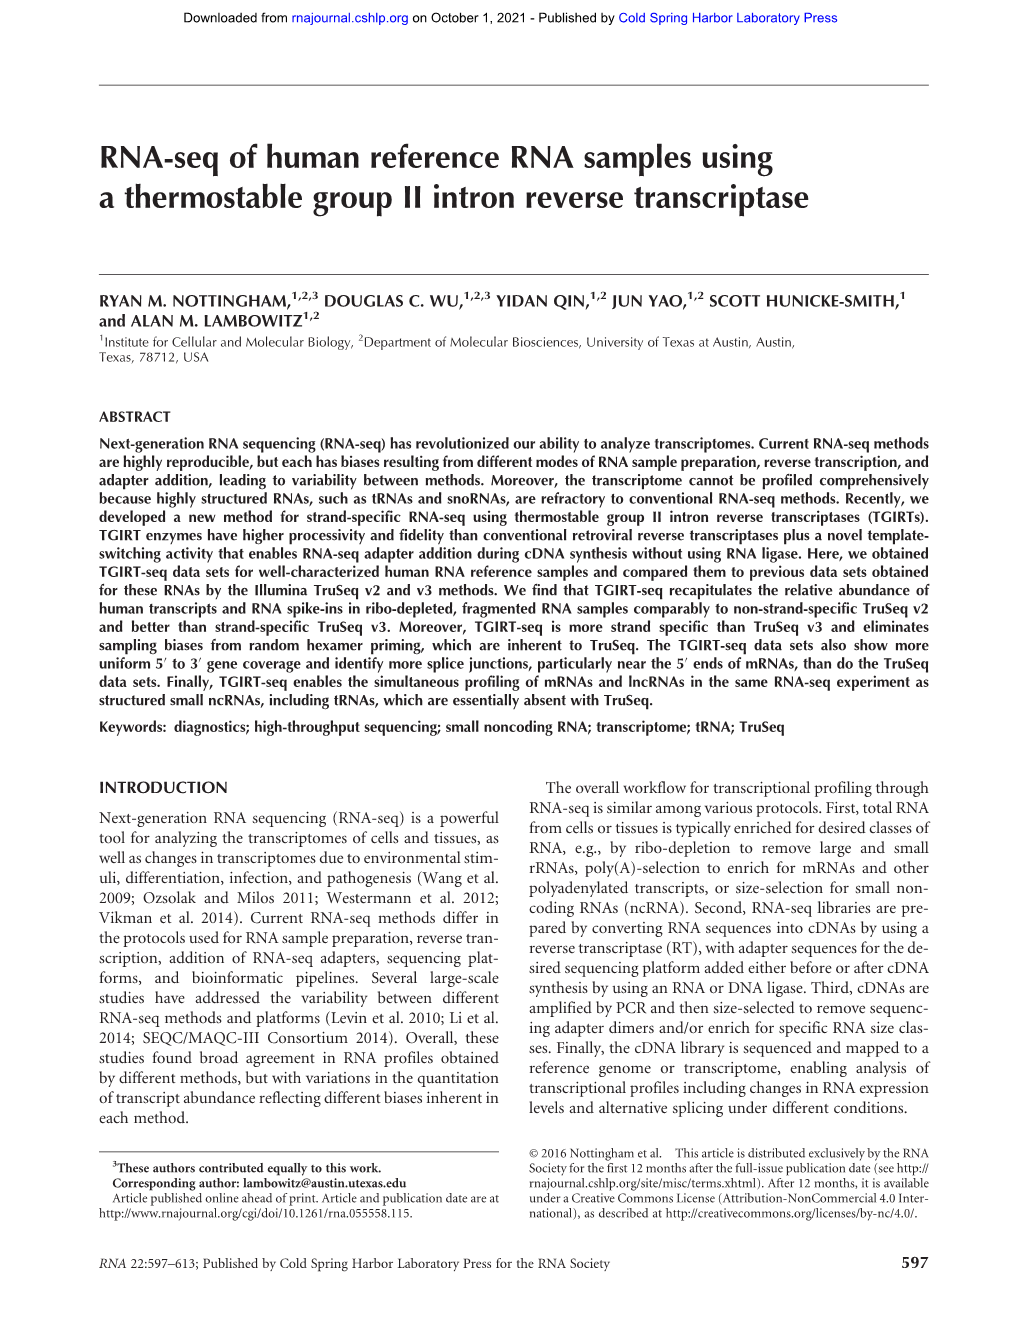 RNA-Seq of Human Reference RNA Samples Using a Thermostable Group II Intron Reverse Transcriptase